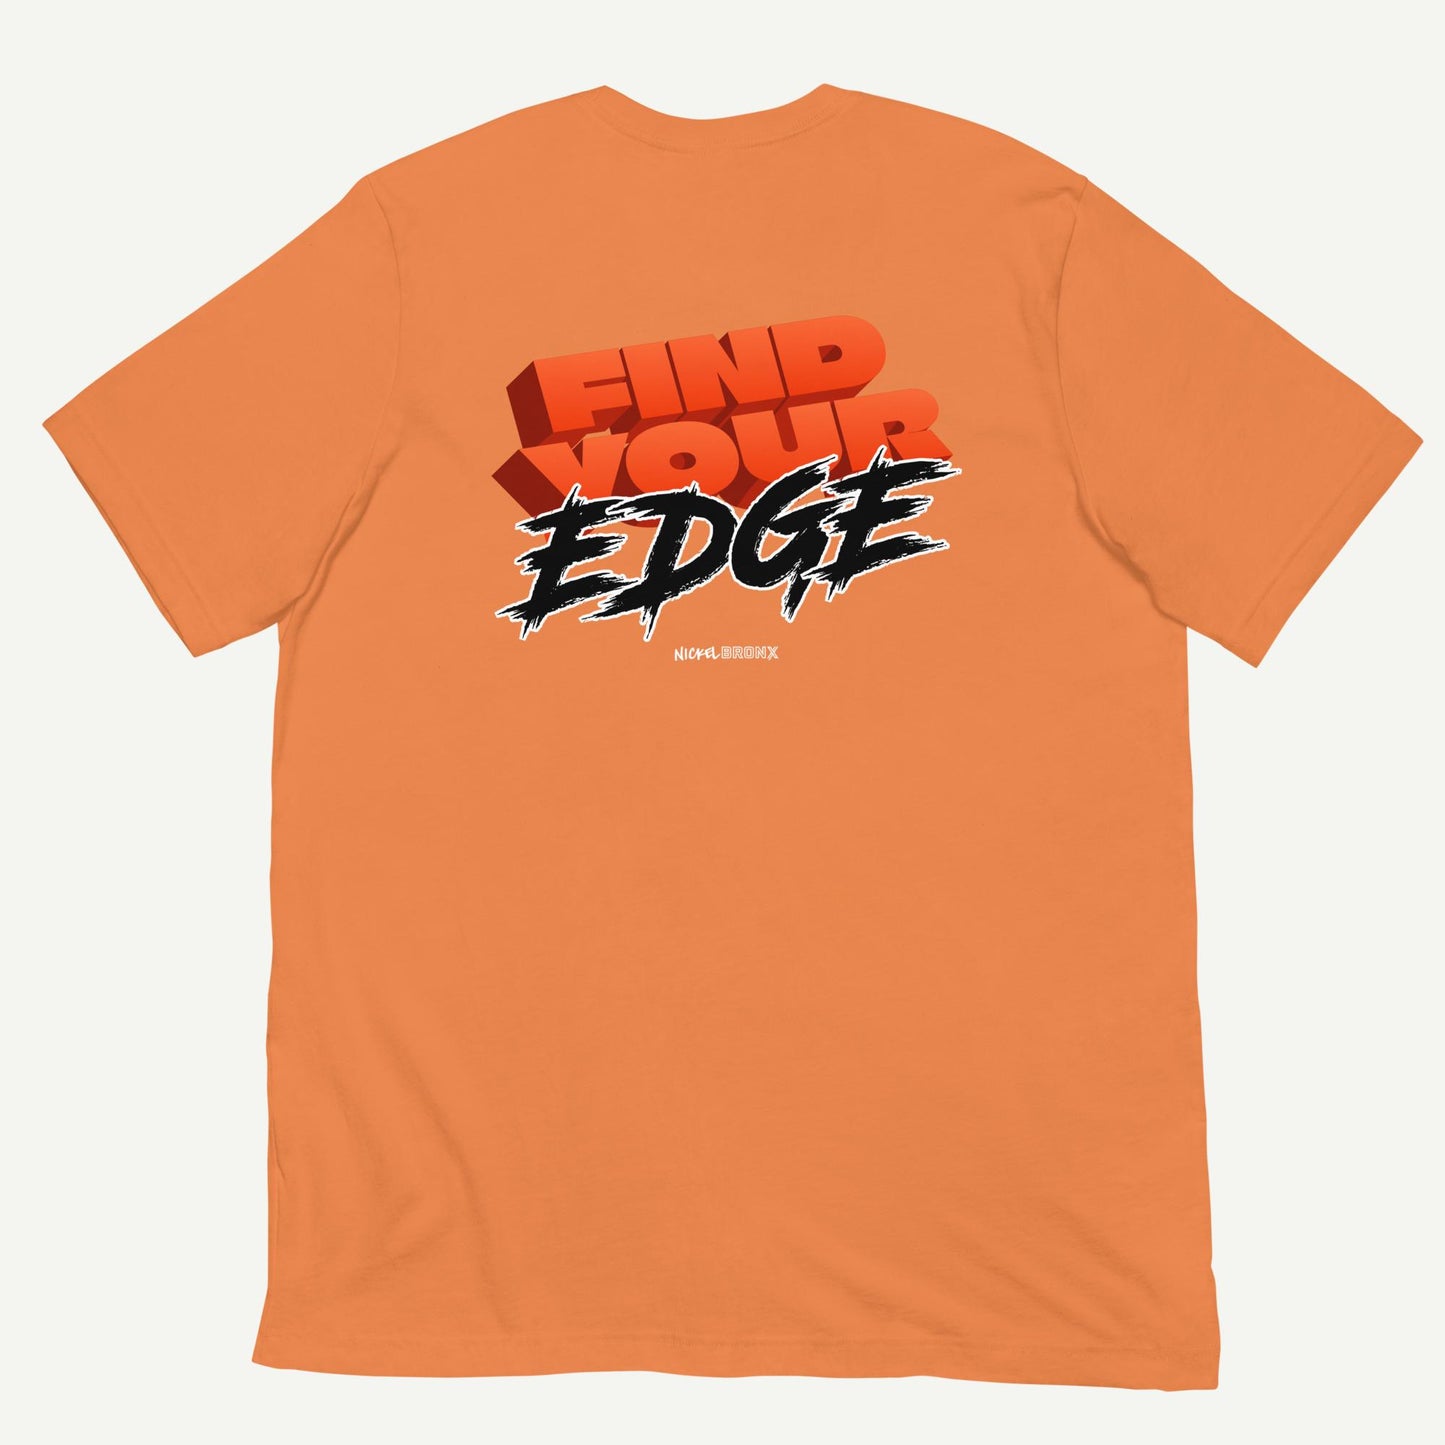 Find Your Edge Tee